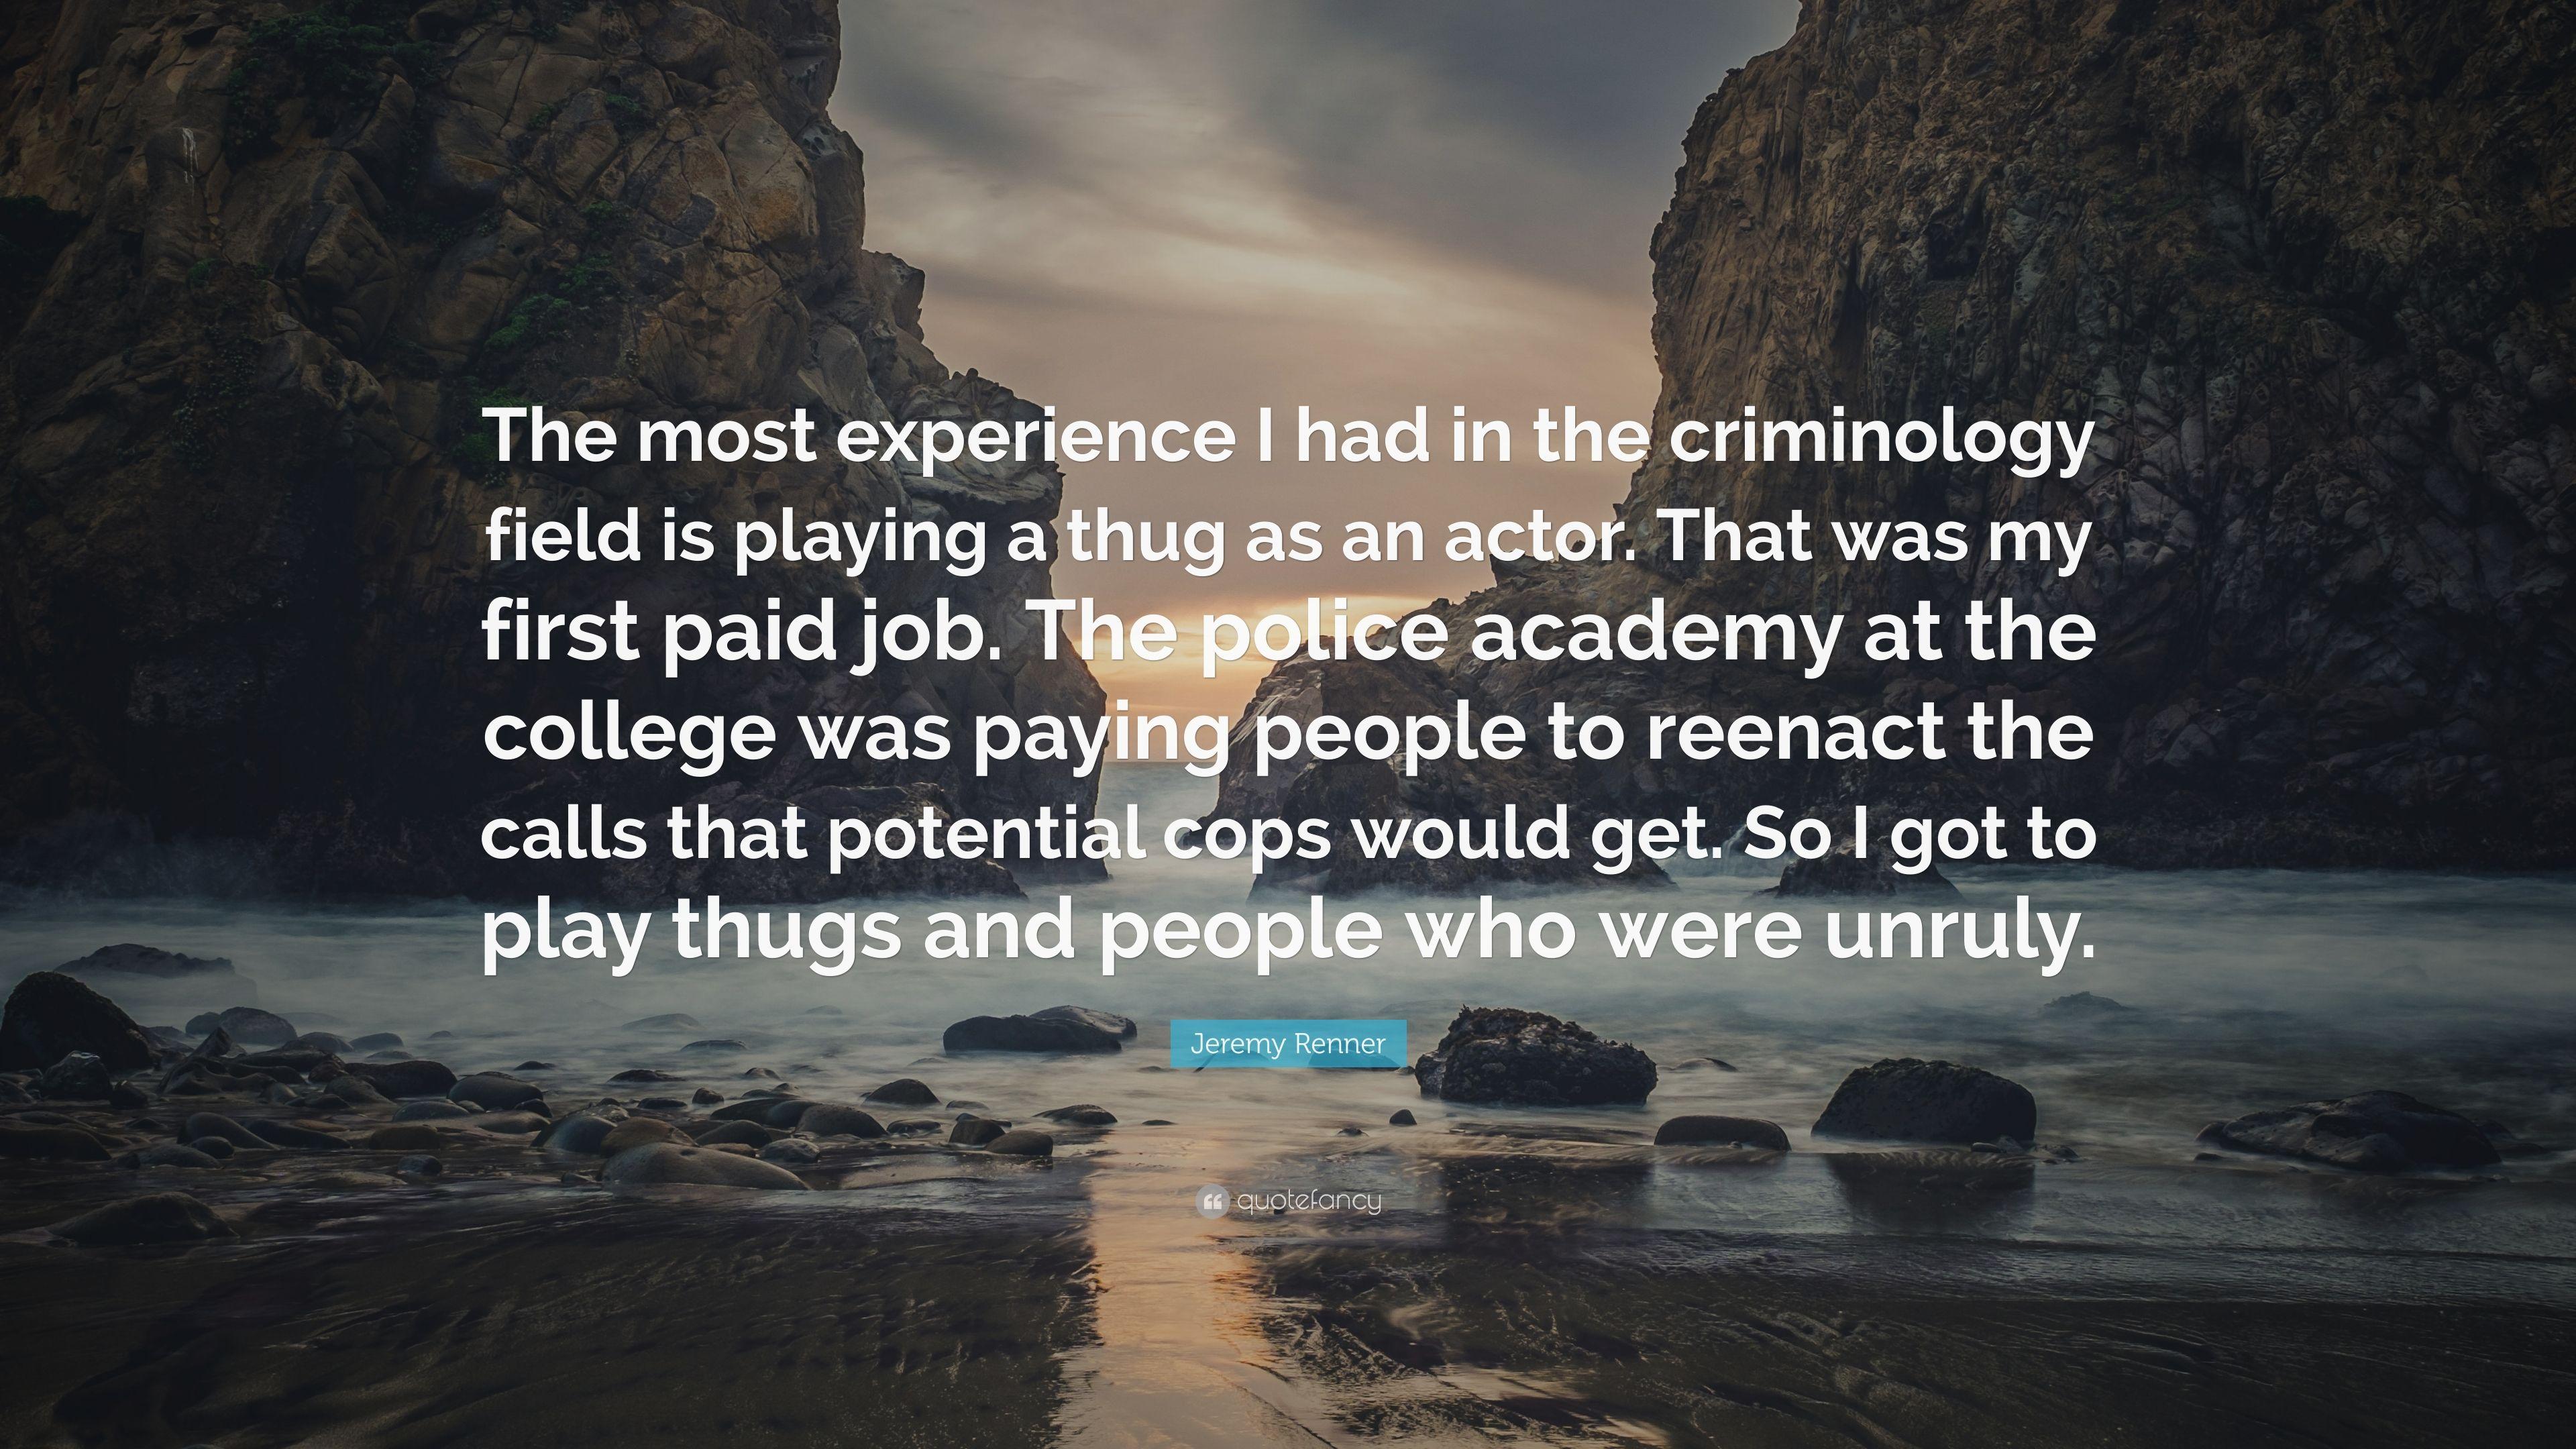 Jeremy Renner Quote: “The most experience I had in the criminology